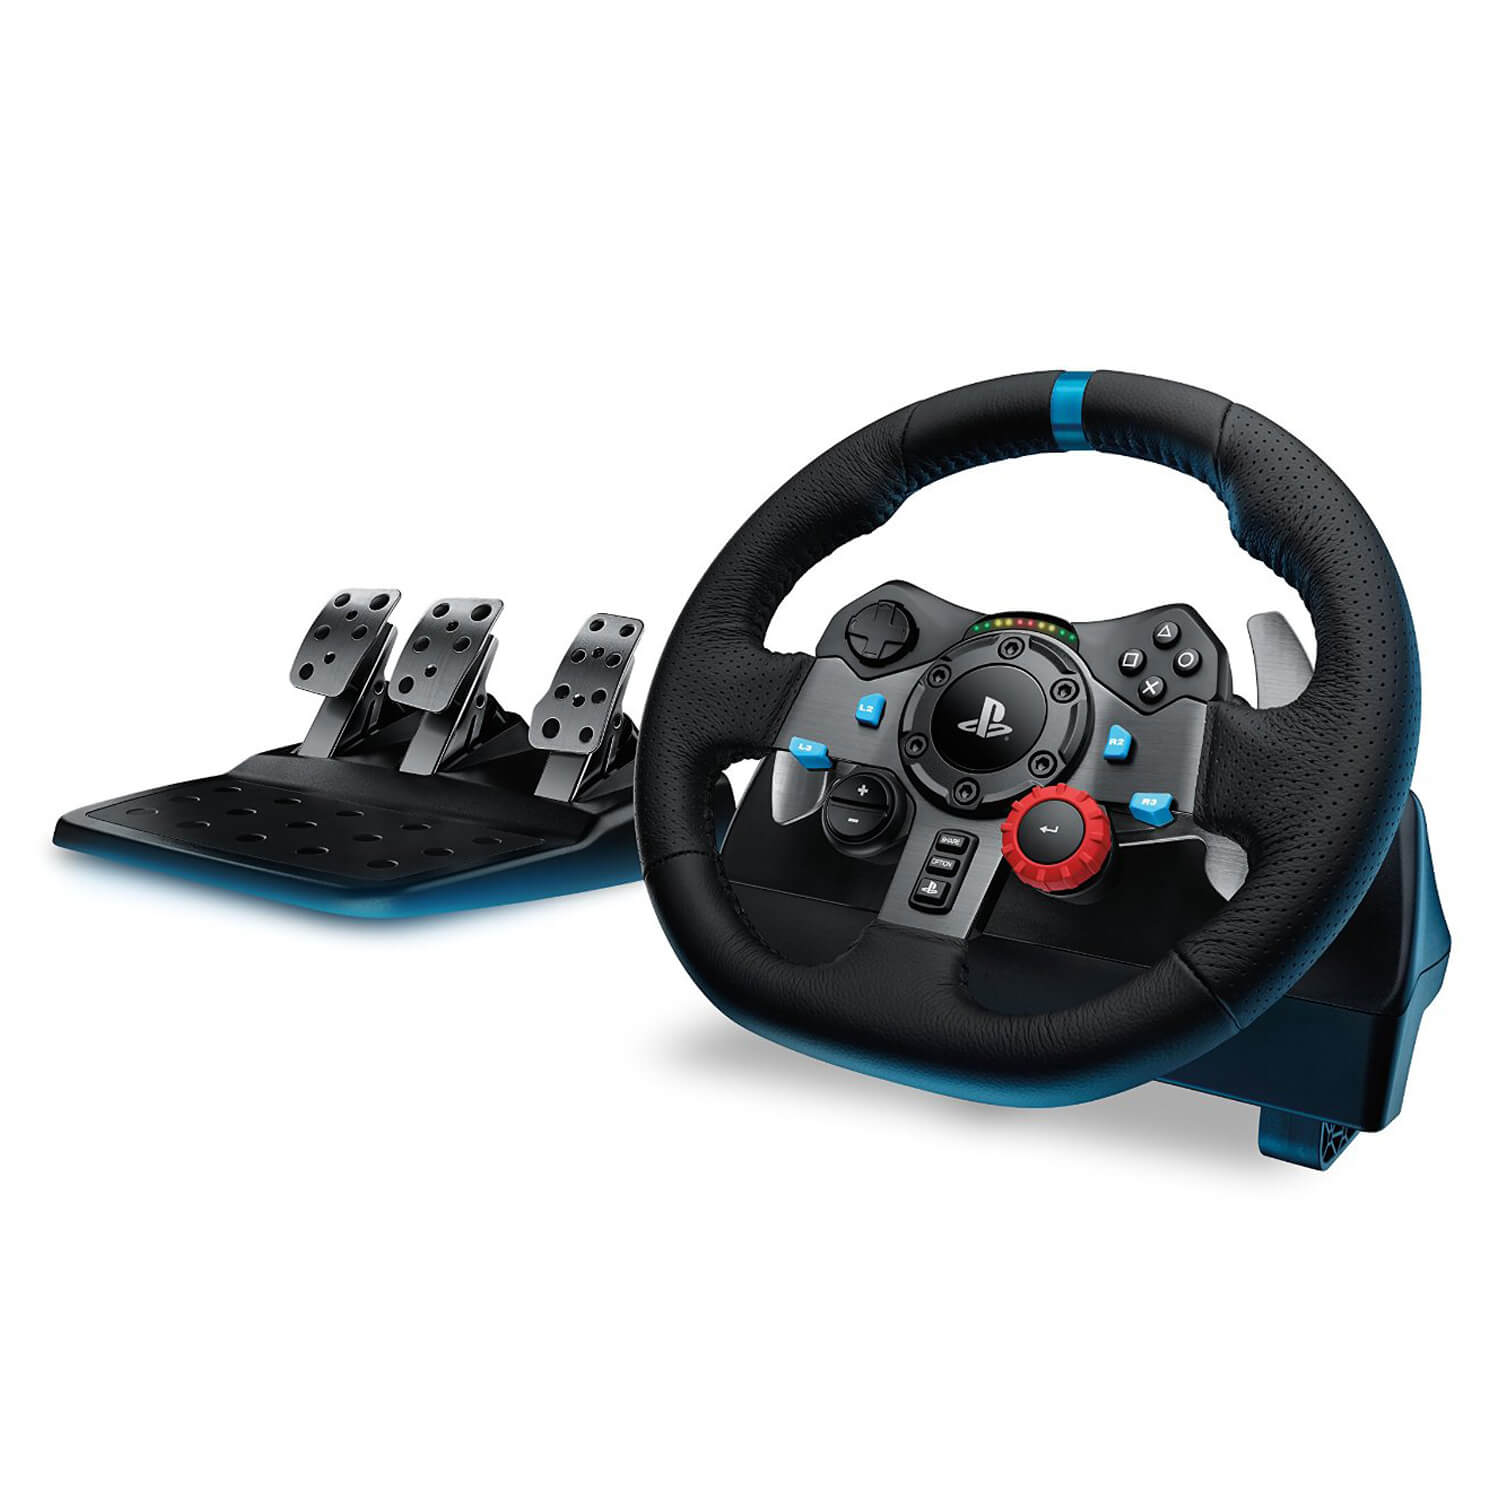 Playing City Car Driving With Logitech g27 - Driving School + Bad Driving 